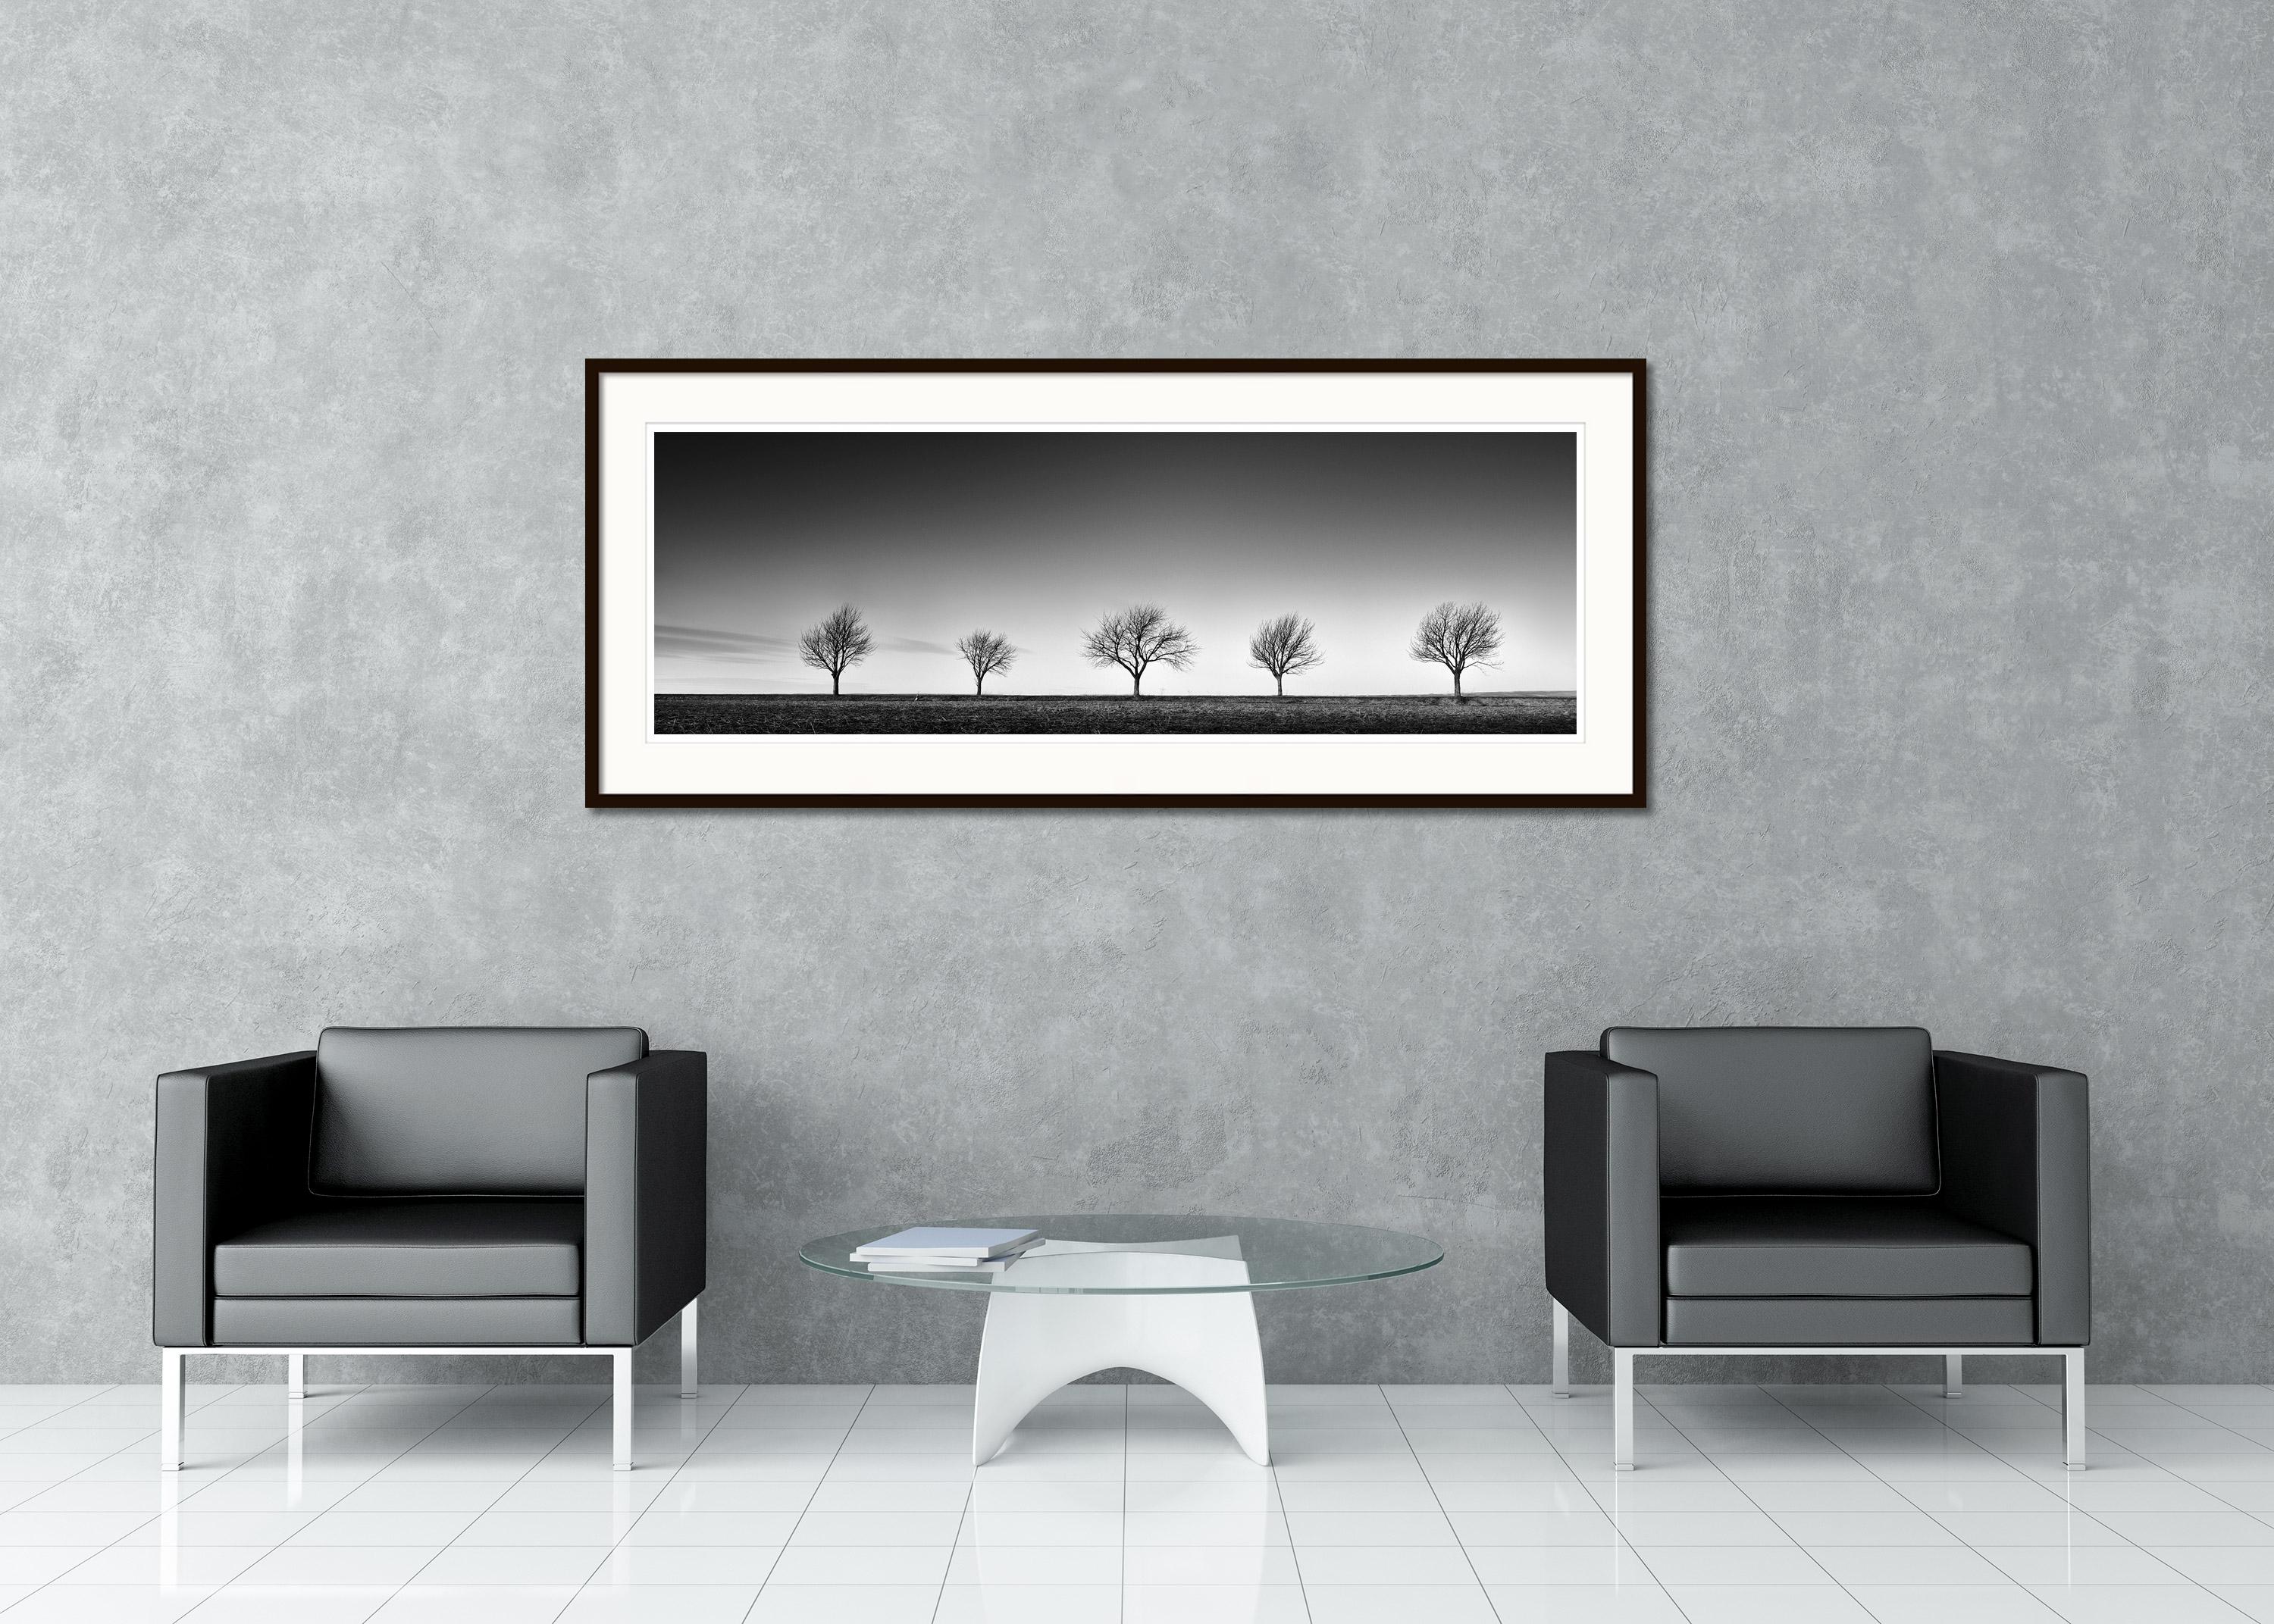 Black and white fine art panorama landscape photography. Archival pigment ink print, limited edition of 7. Cherry trees in a row at the edge of the field at sunset, Austria. All Gerald Berghammer prints are made to order in limited editions on